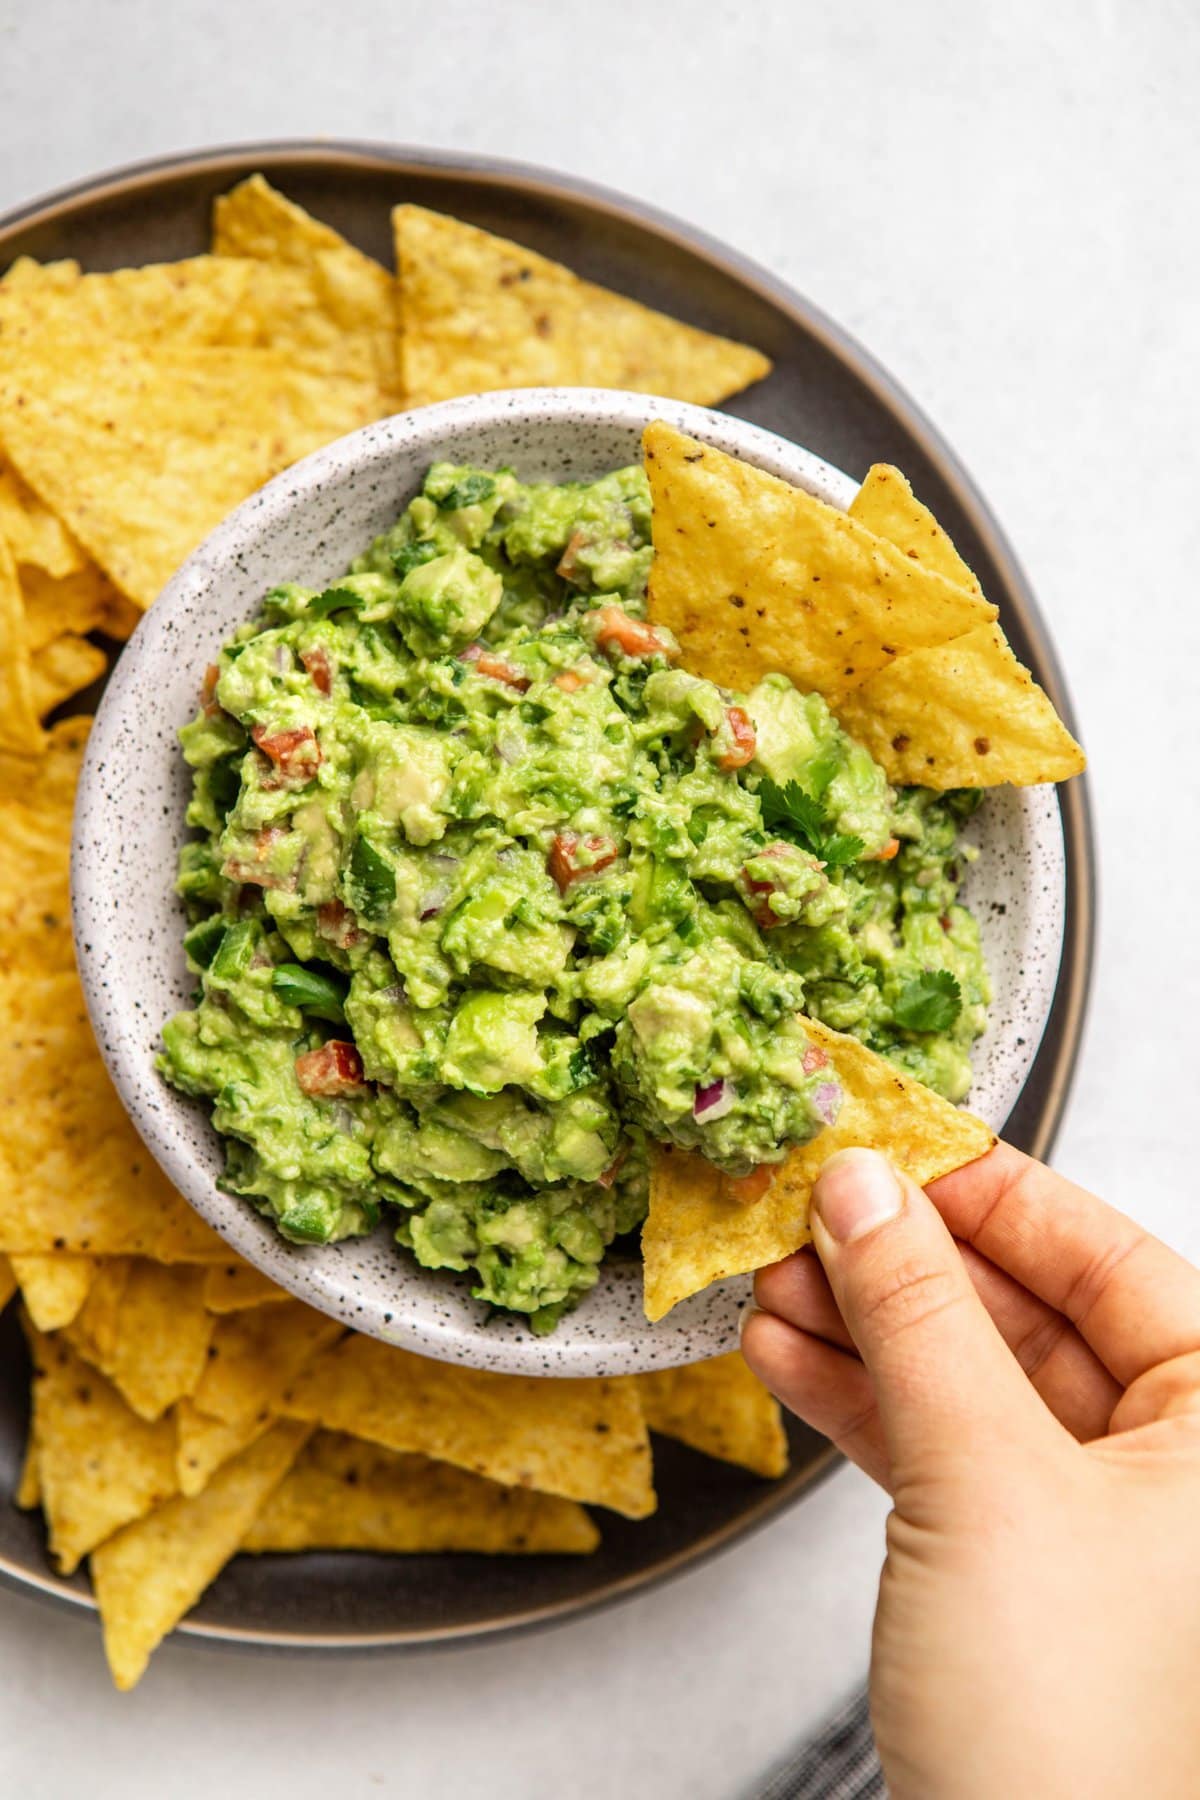 Best_Guacamole_Recipe_FromMyBowl_Restaurant-Style-12-scaled.jpg